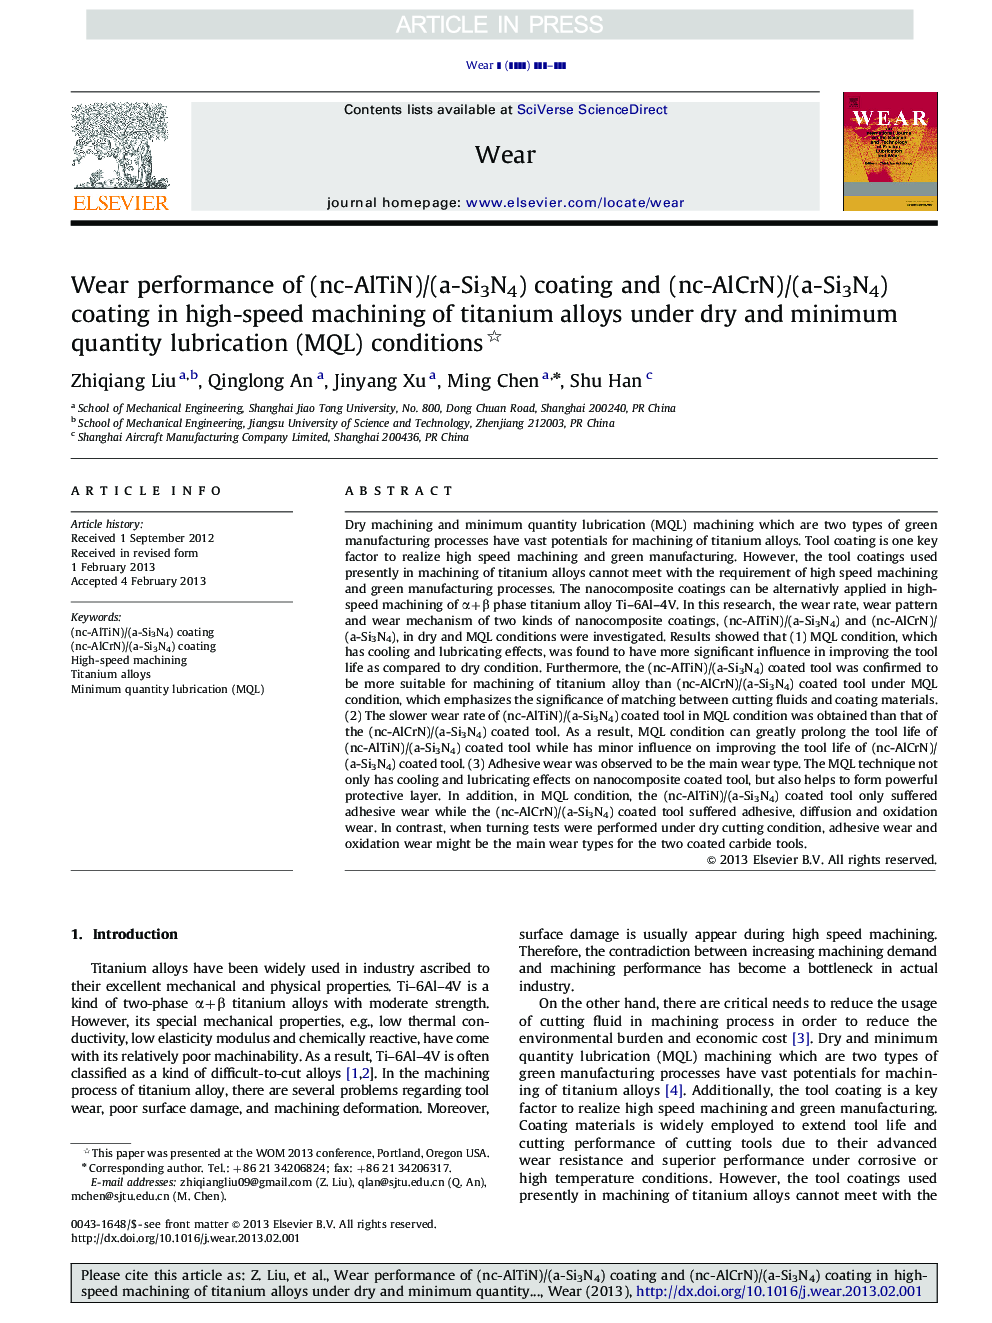 Wear performance of (nc-AlTiN)/(a-Si3N4) coating and (nc-AlCrN)/(a-Si3N4) coating in high-speed machining of titanium alloys under dry and minimum quantity lubrication (MQL) conditions